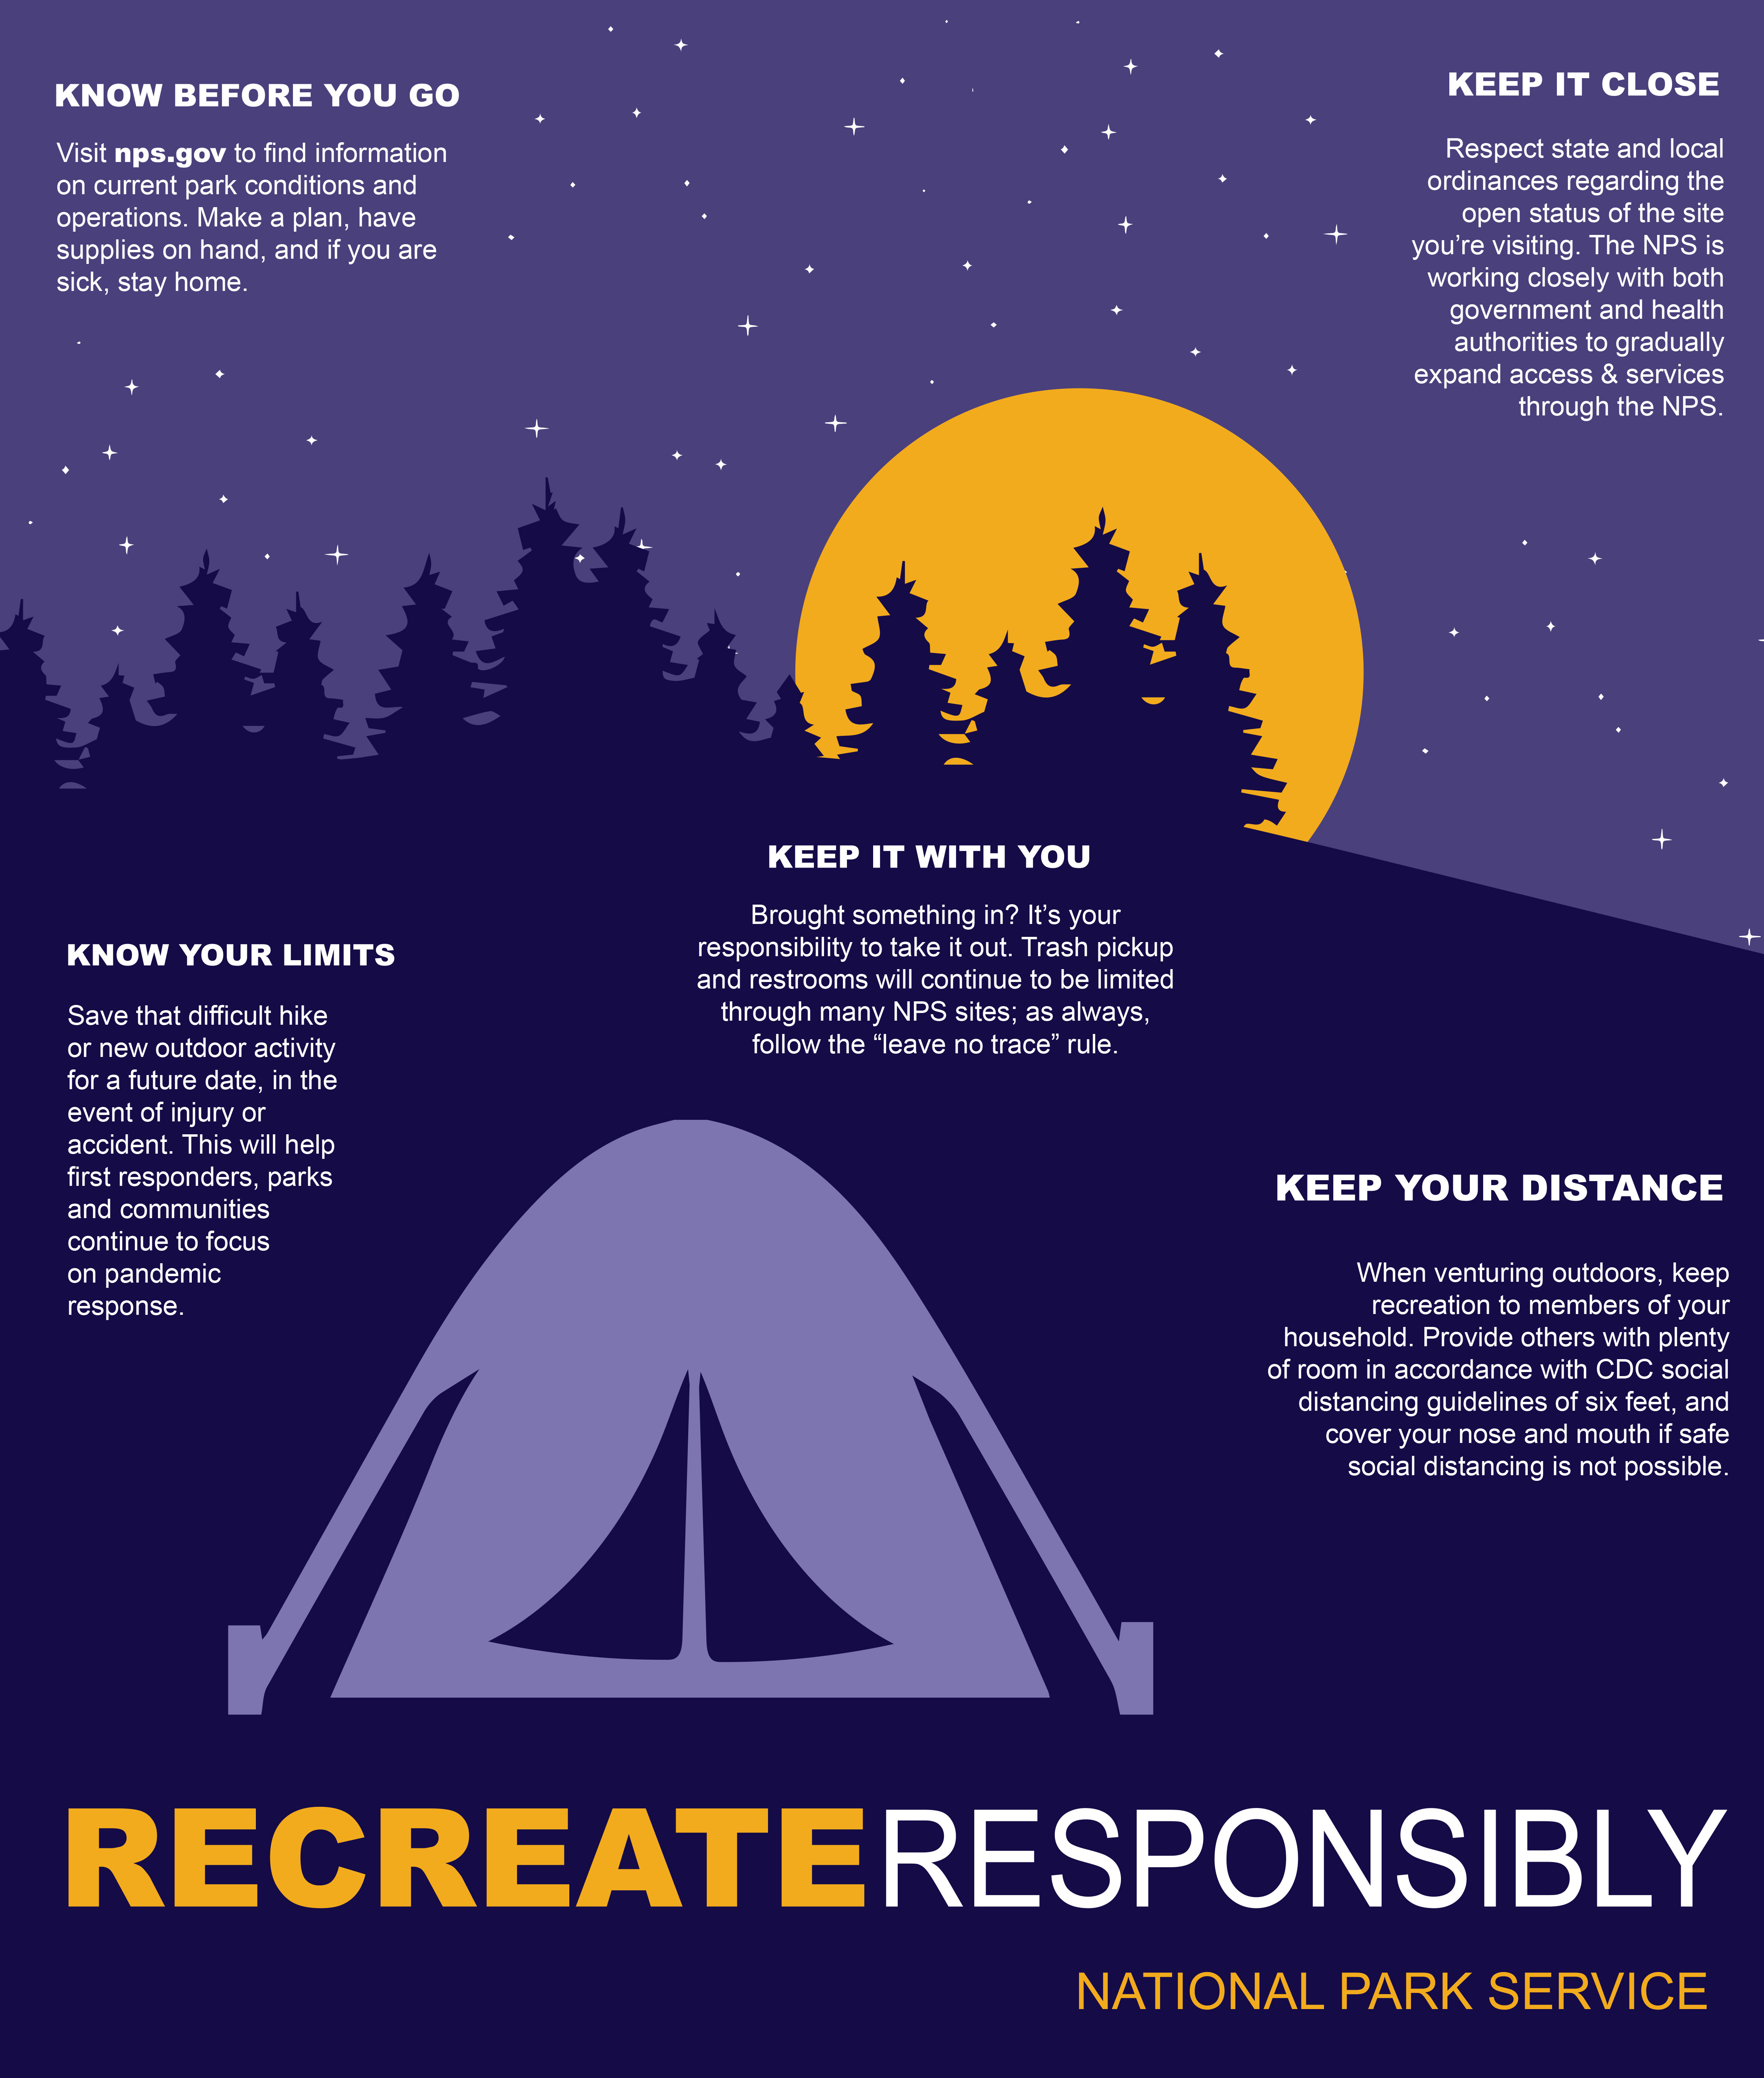 https://www.nps.gov/pore/planyourvisit/images/infographic_recreate_responsibly_camping_4378x5157.jpg